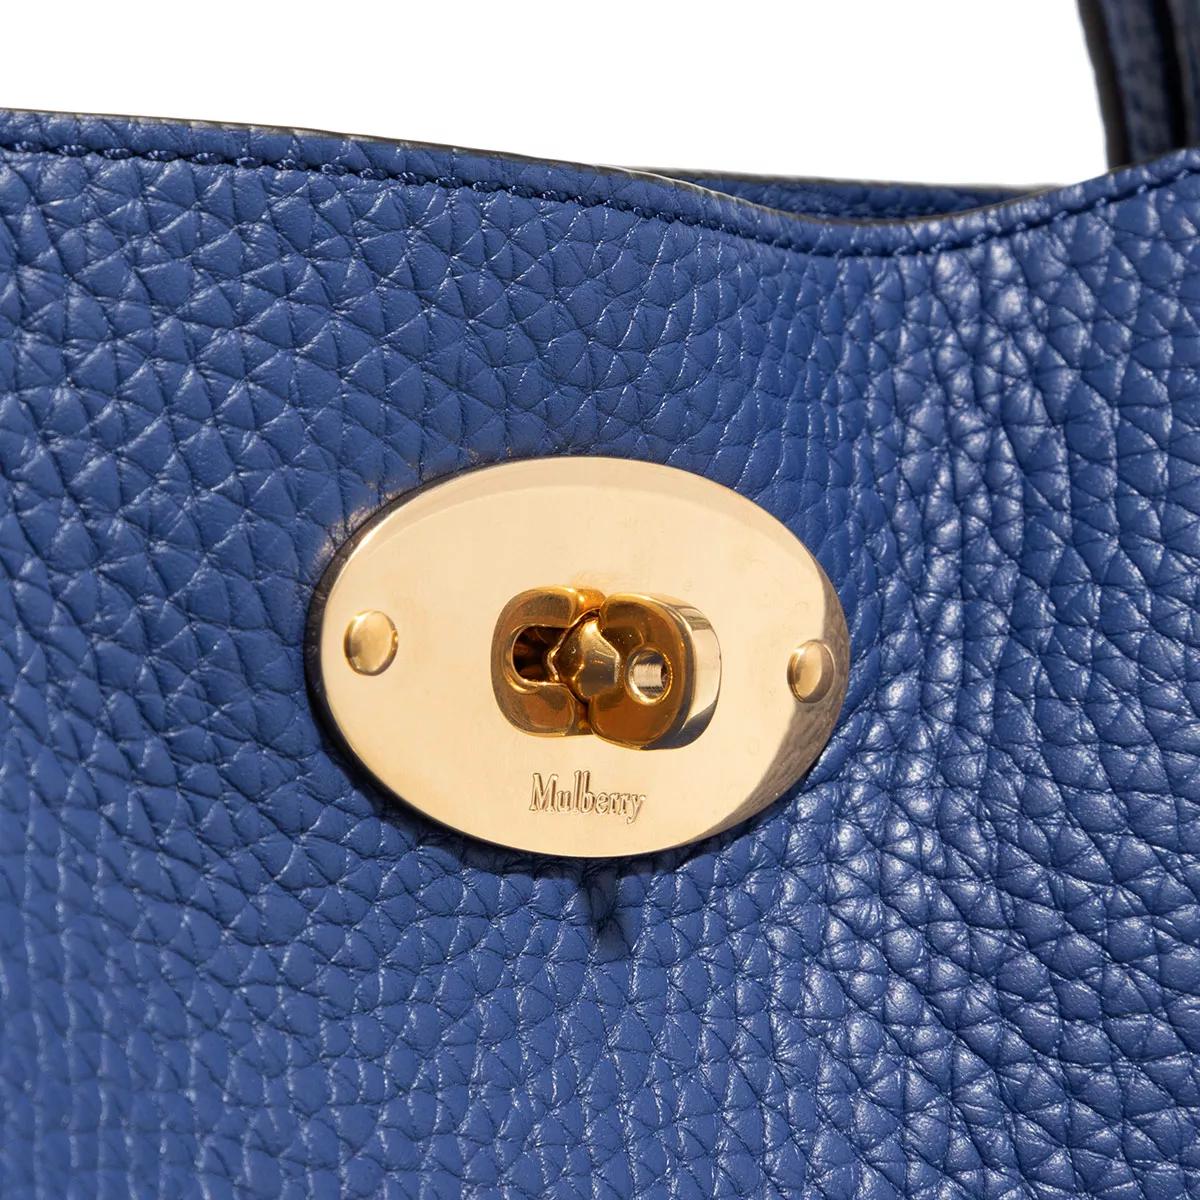 Mulberry Hobo bags North South Bayswater Tote in blauw